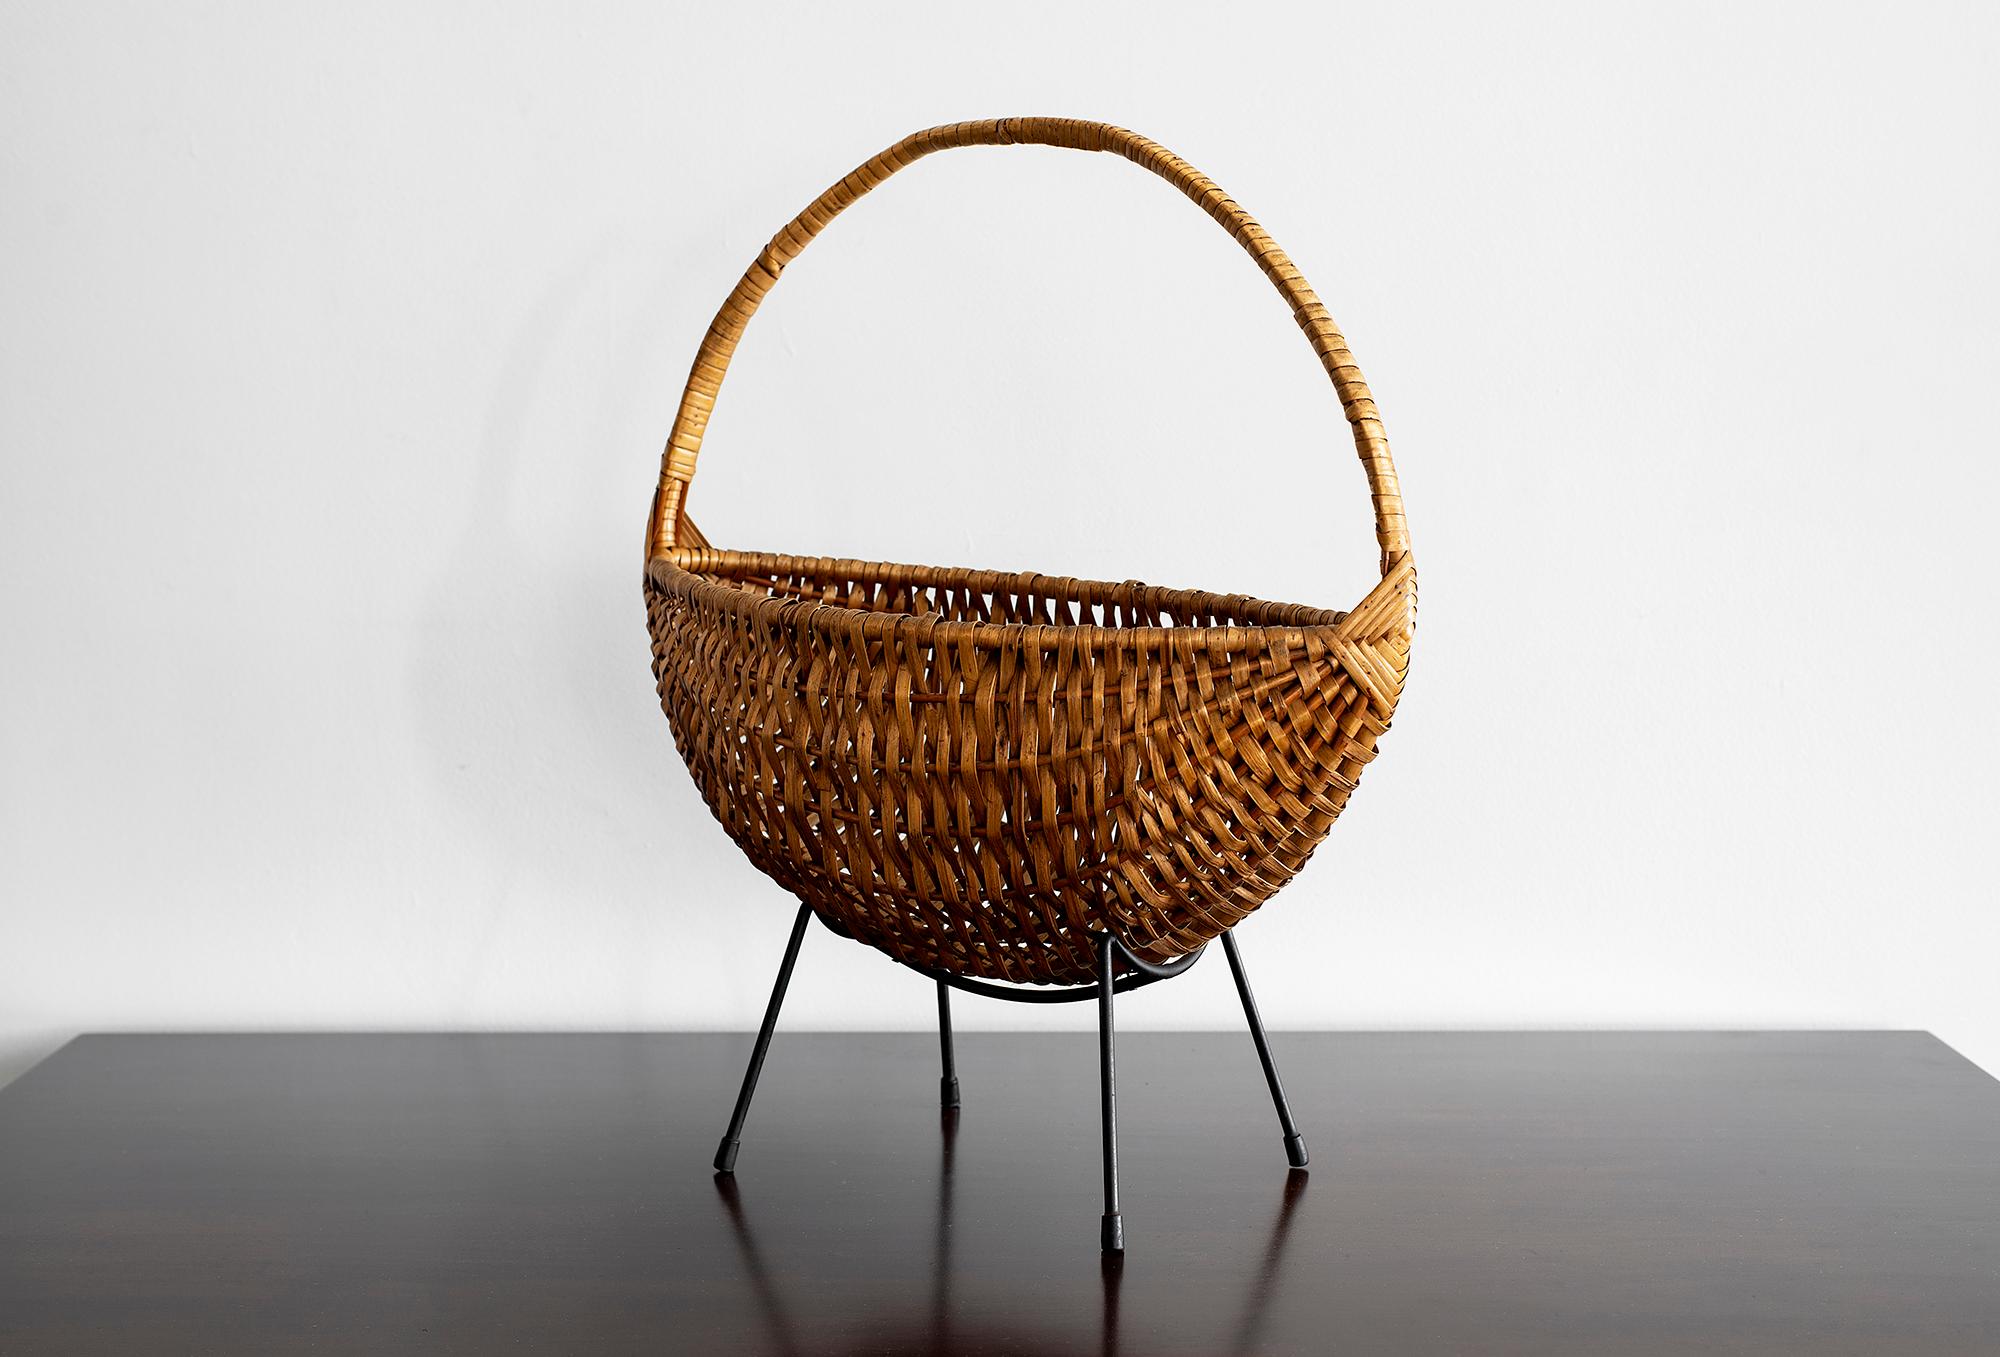 Sculptural French wicker and iron catch all or fruit bowl